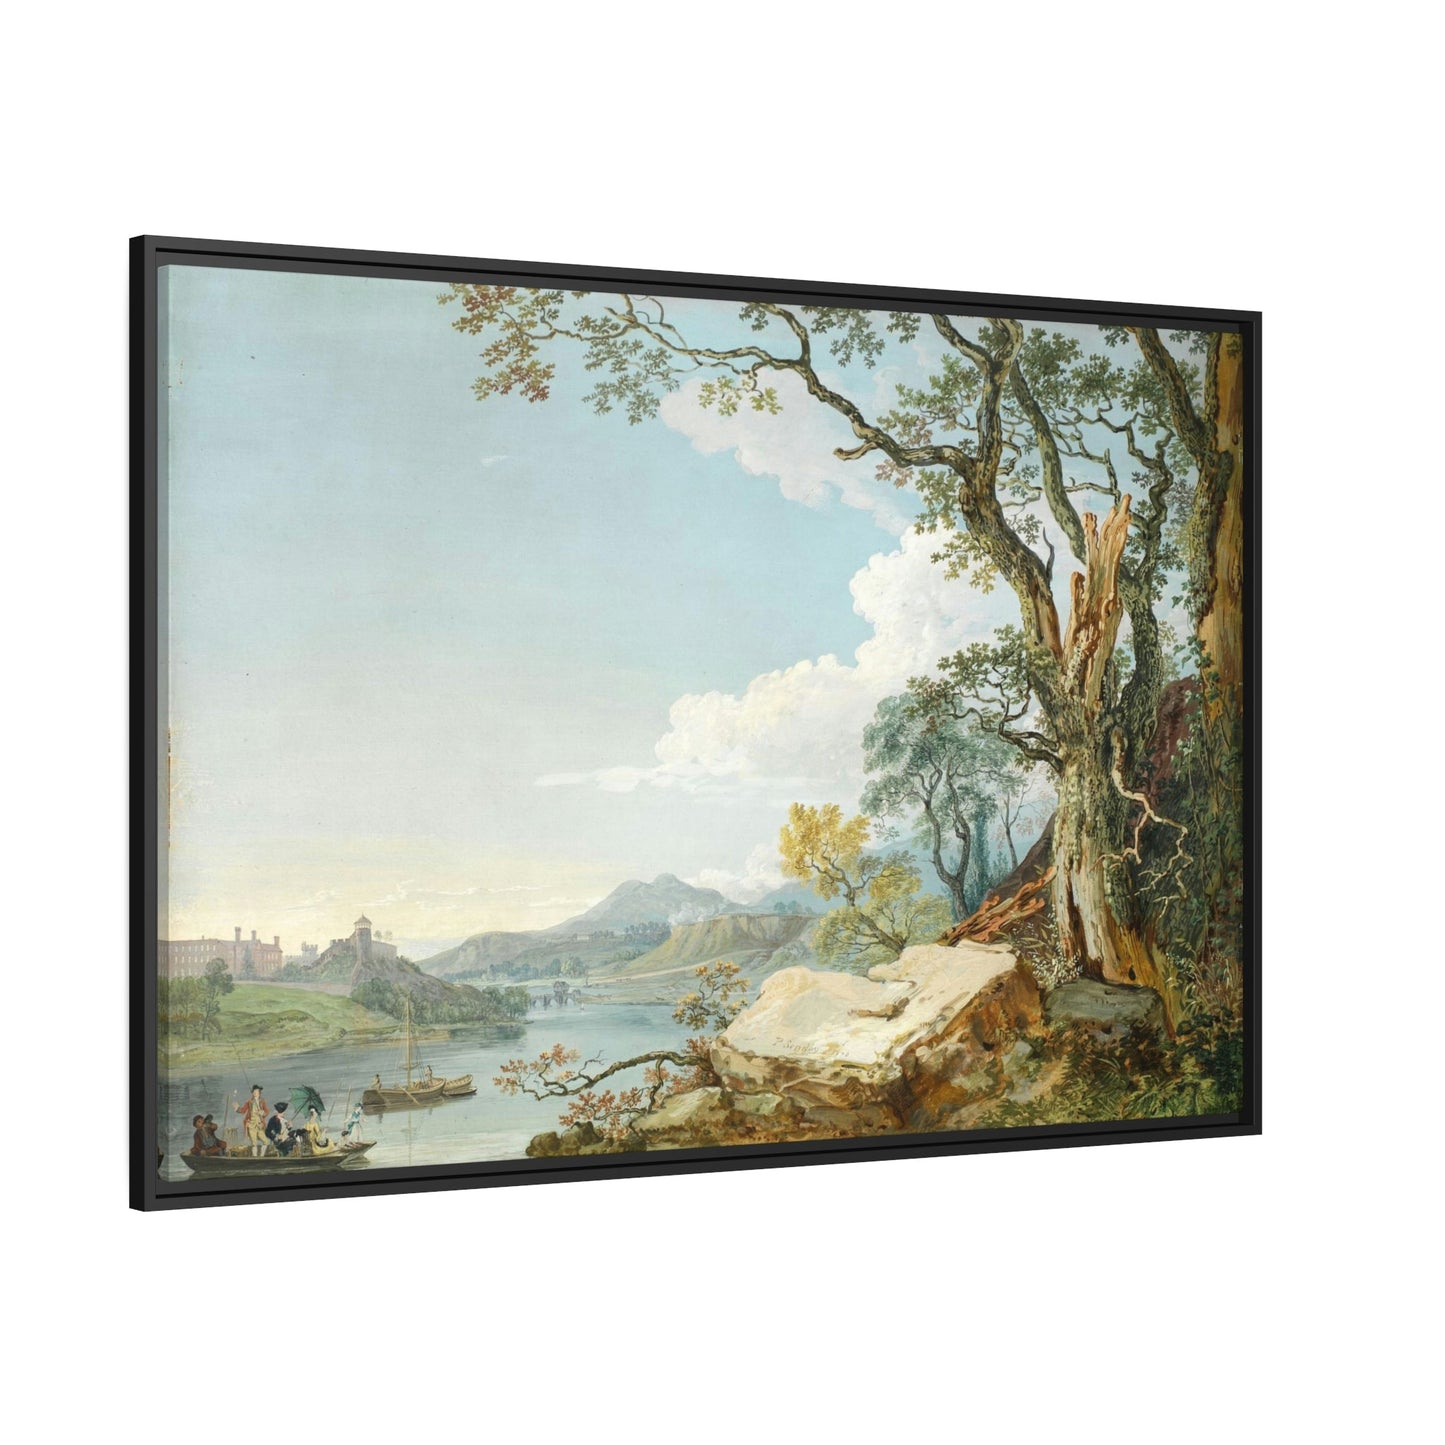 Captivating Waterways: Framed Canvas and Poster Print of Lakes and Rivers